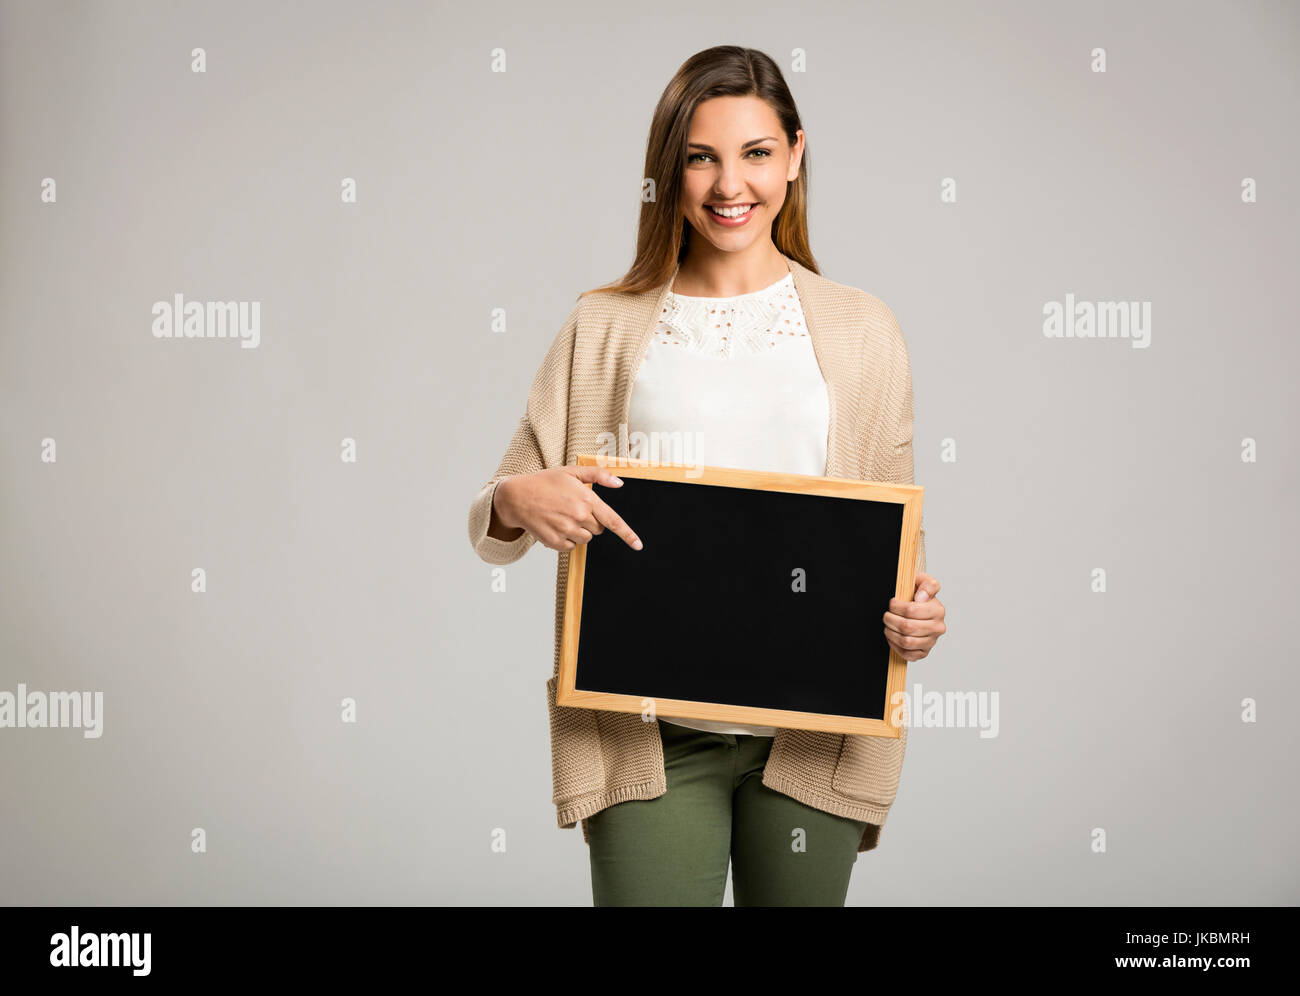 Beautiful and happy woman holding and pointing to a chalkboard Stock Photo